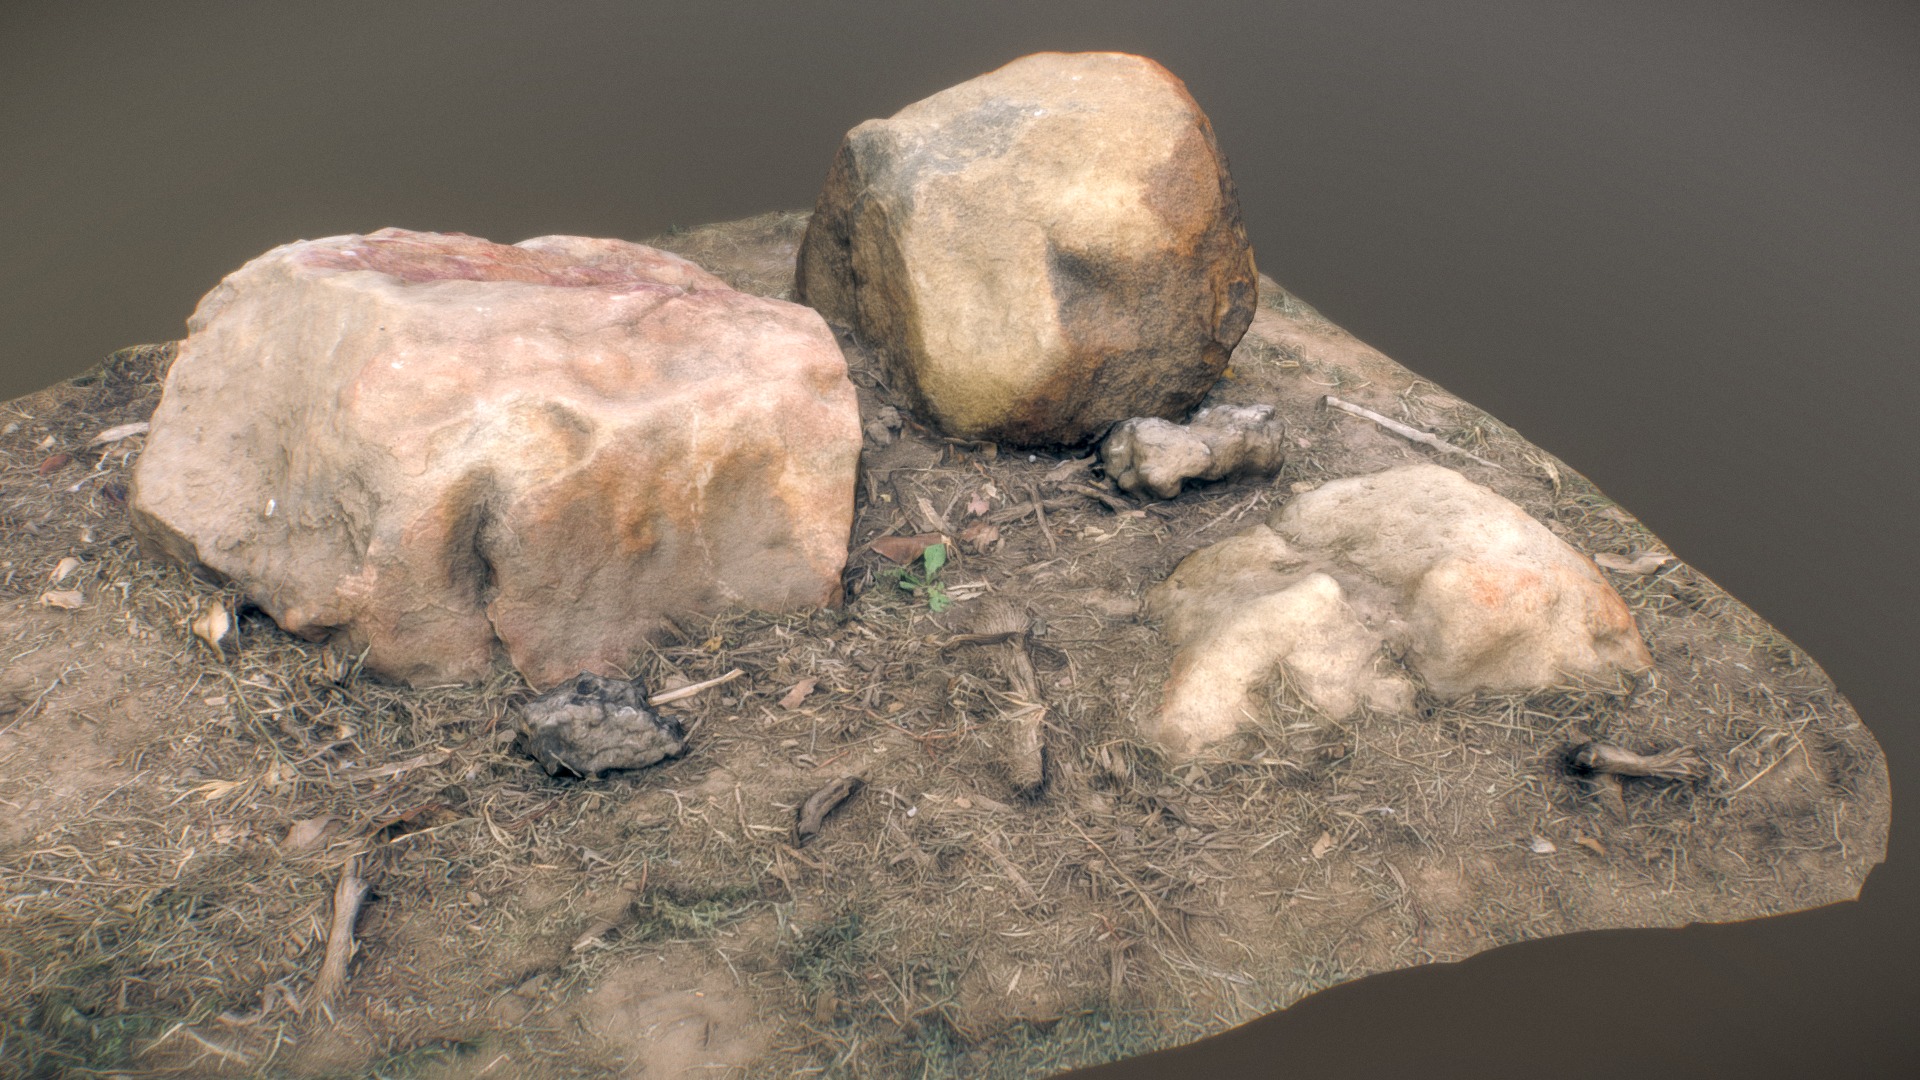 3D model Boulder – Sample from Boulder 6-Pack - This is a 3D model of the Boulder - Sample from Boulder 6-Pack. The 3D model is about a group of large rocks.